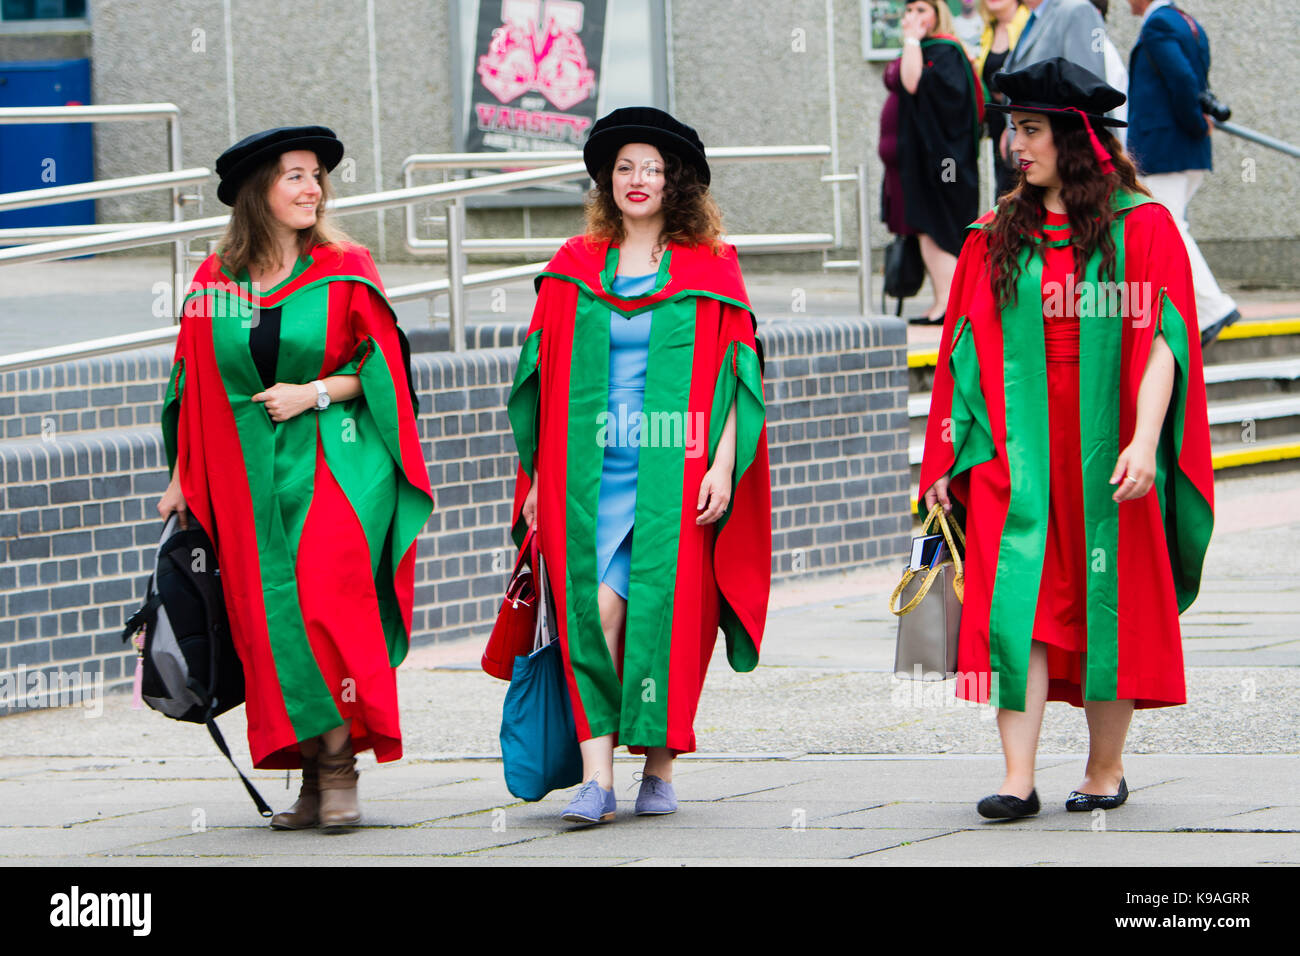 Higher Education in the UK: Three women PhD Doctorol Aberystwyth University students wearing traditional academic gowns and mortar boards  on their graduation day, July 2017 Stock Photo